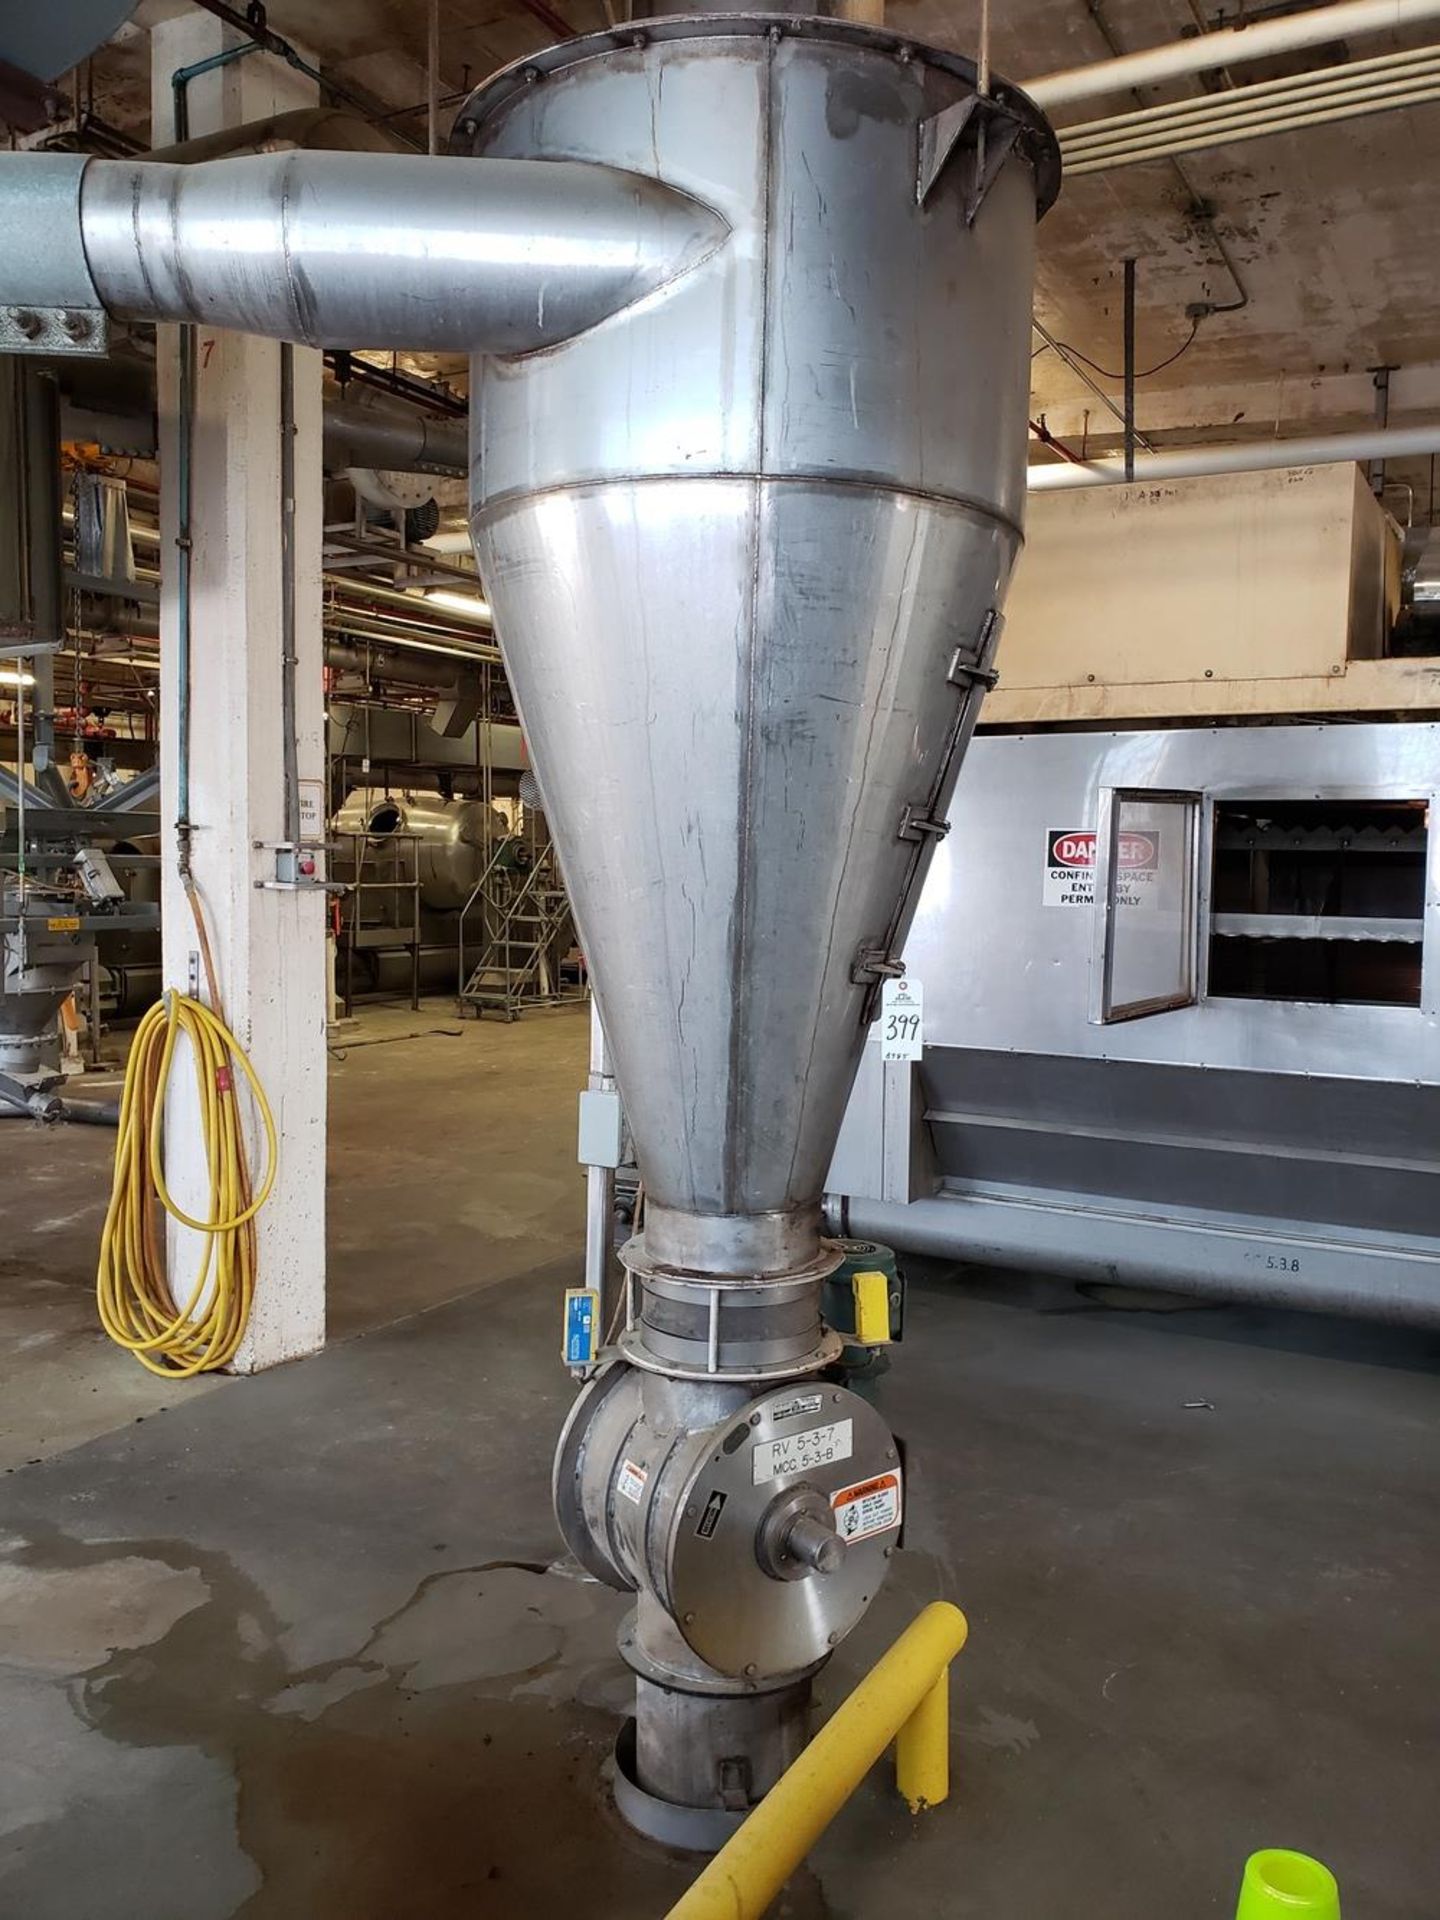 Kice Stainless Steel Rotary Valve, M# VBS-16X12, W/ Cyclone Reciever | Rig Fee: $250